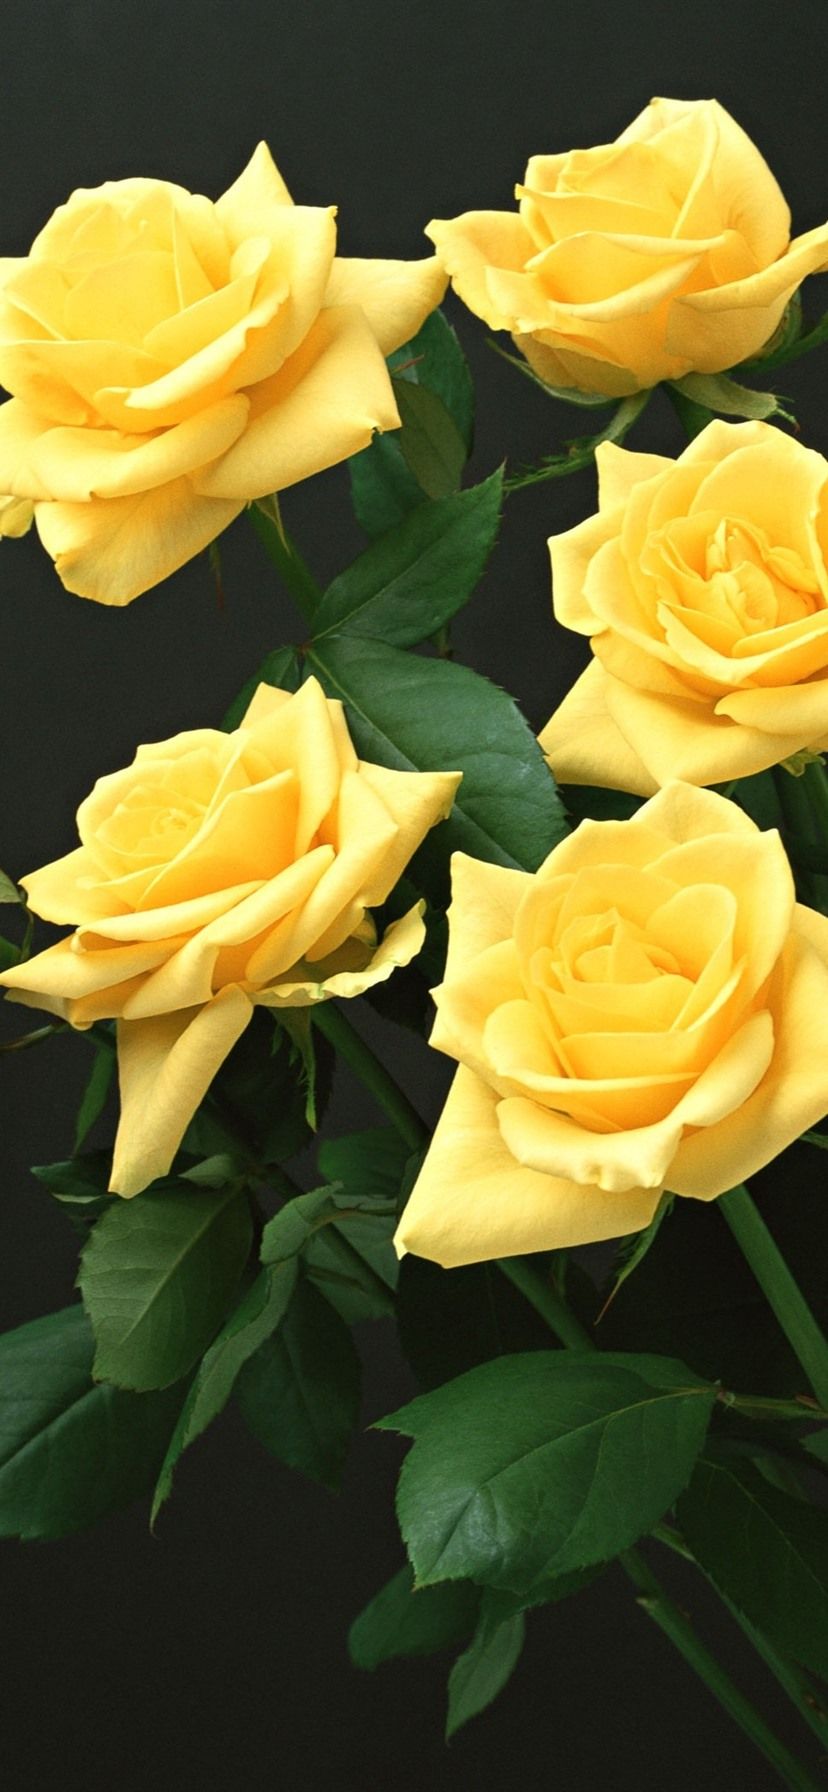 Some Yellow Roses, Black Background 1080x1920 IPhone 8 7 6 6S Plus